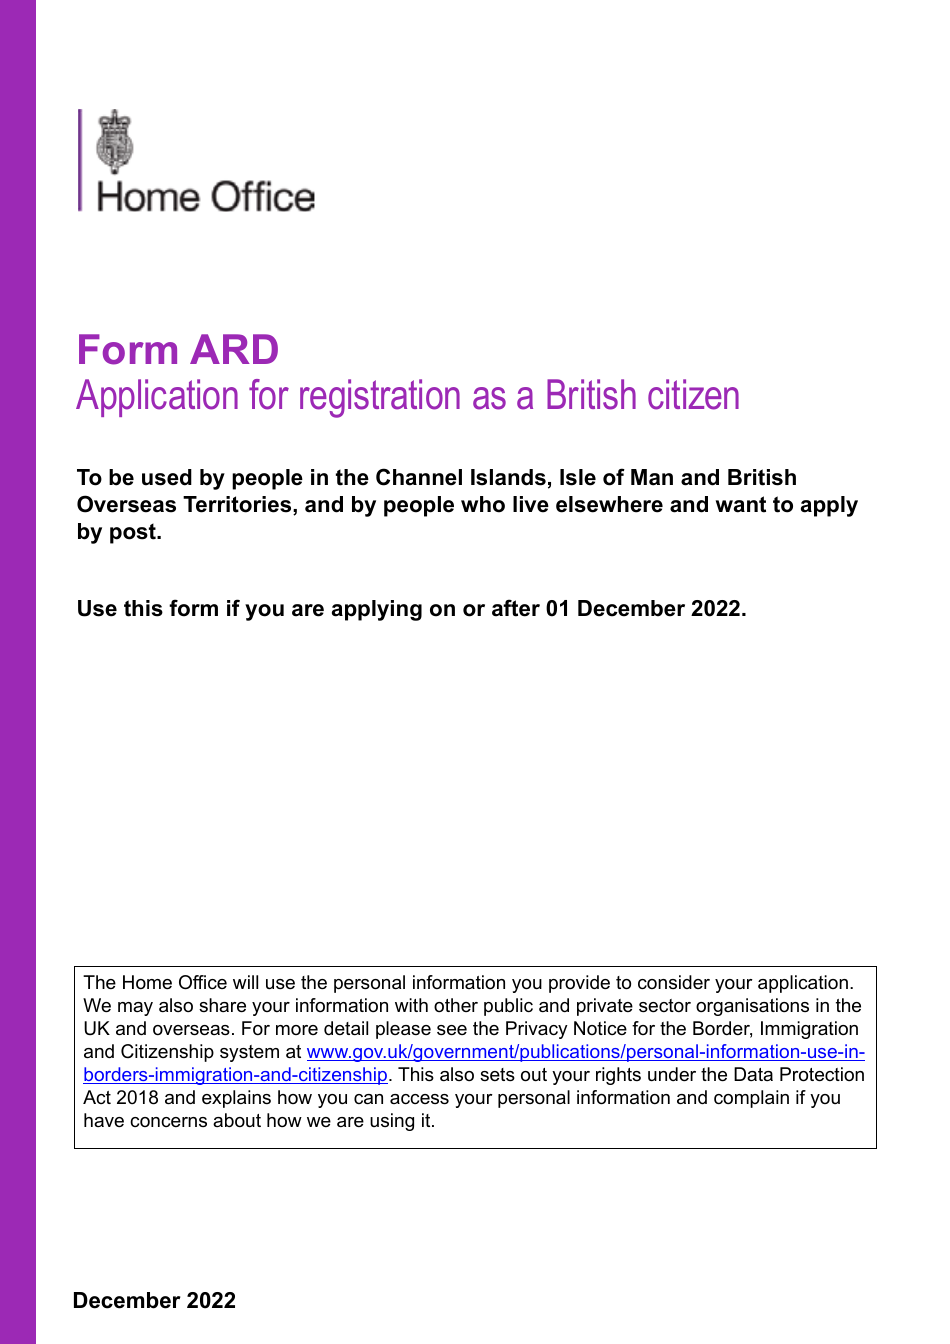 Form ARD Application for Registration as a British Citizen - United Kingdom, Page 1